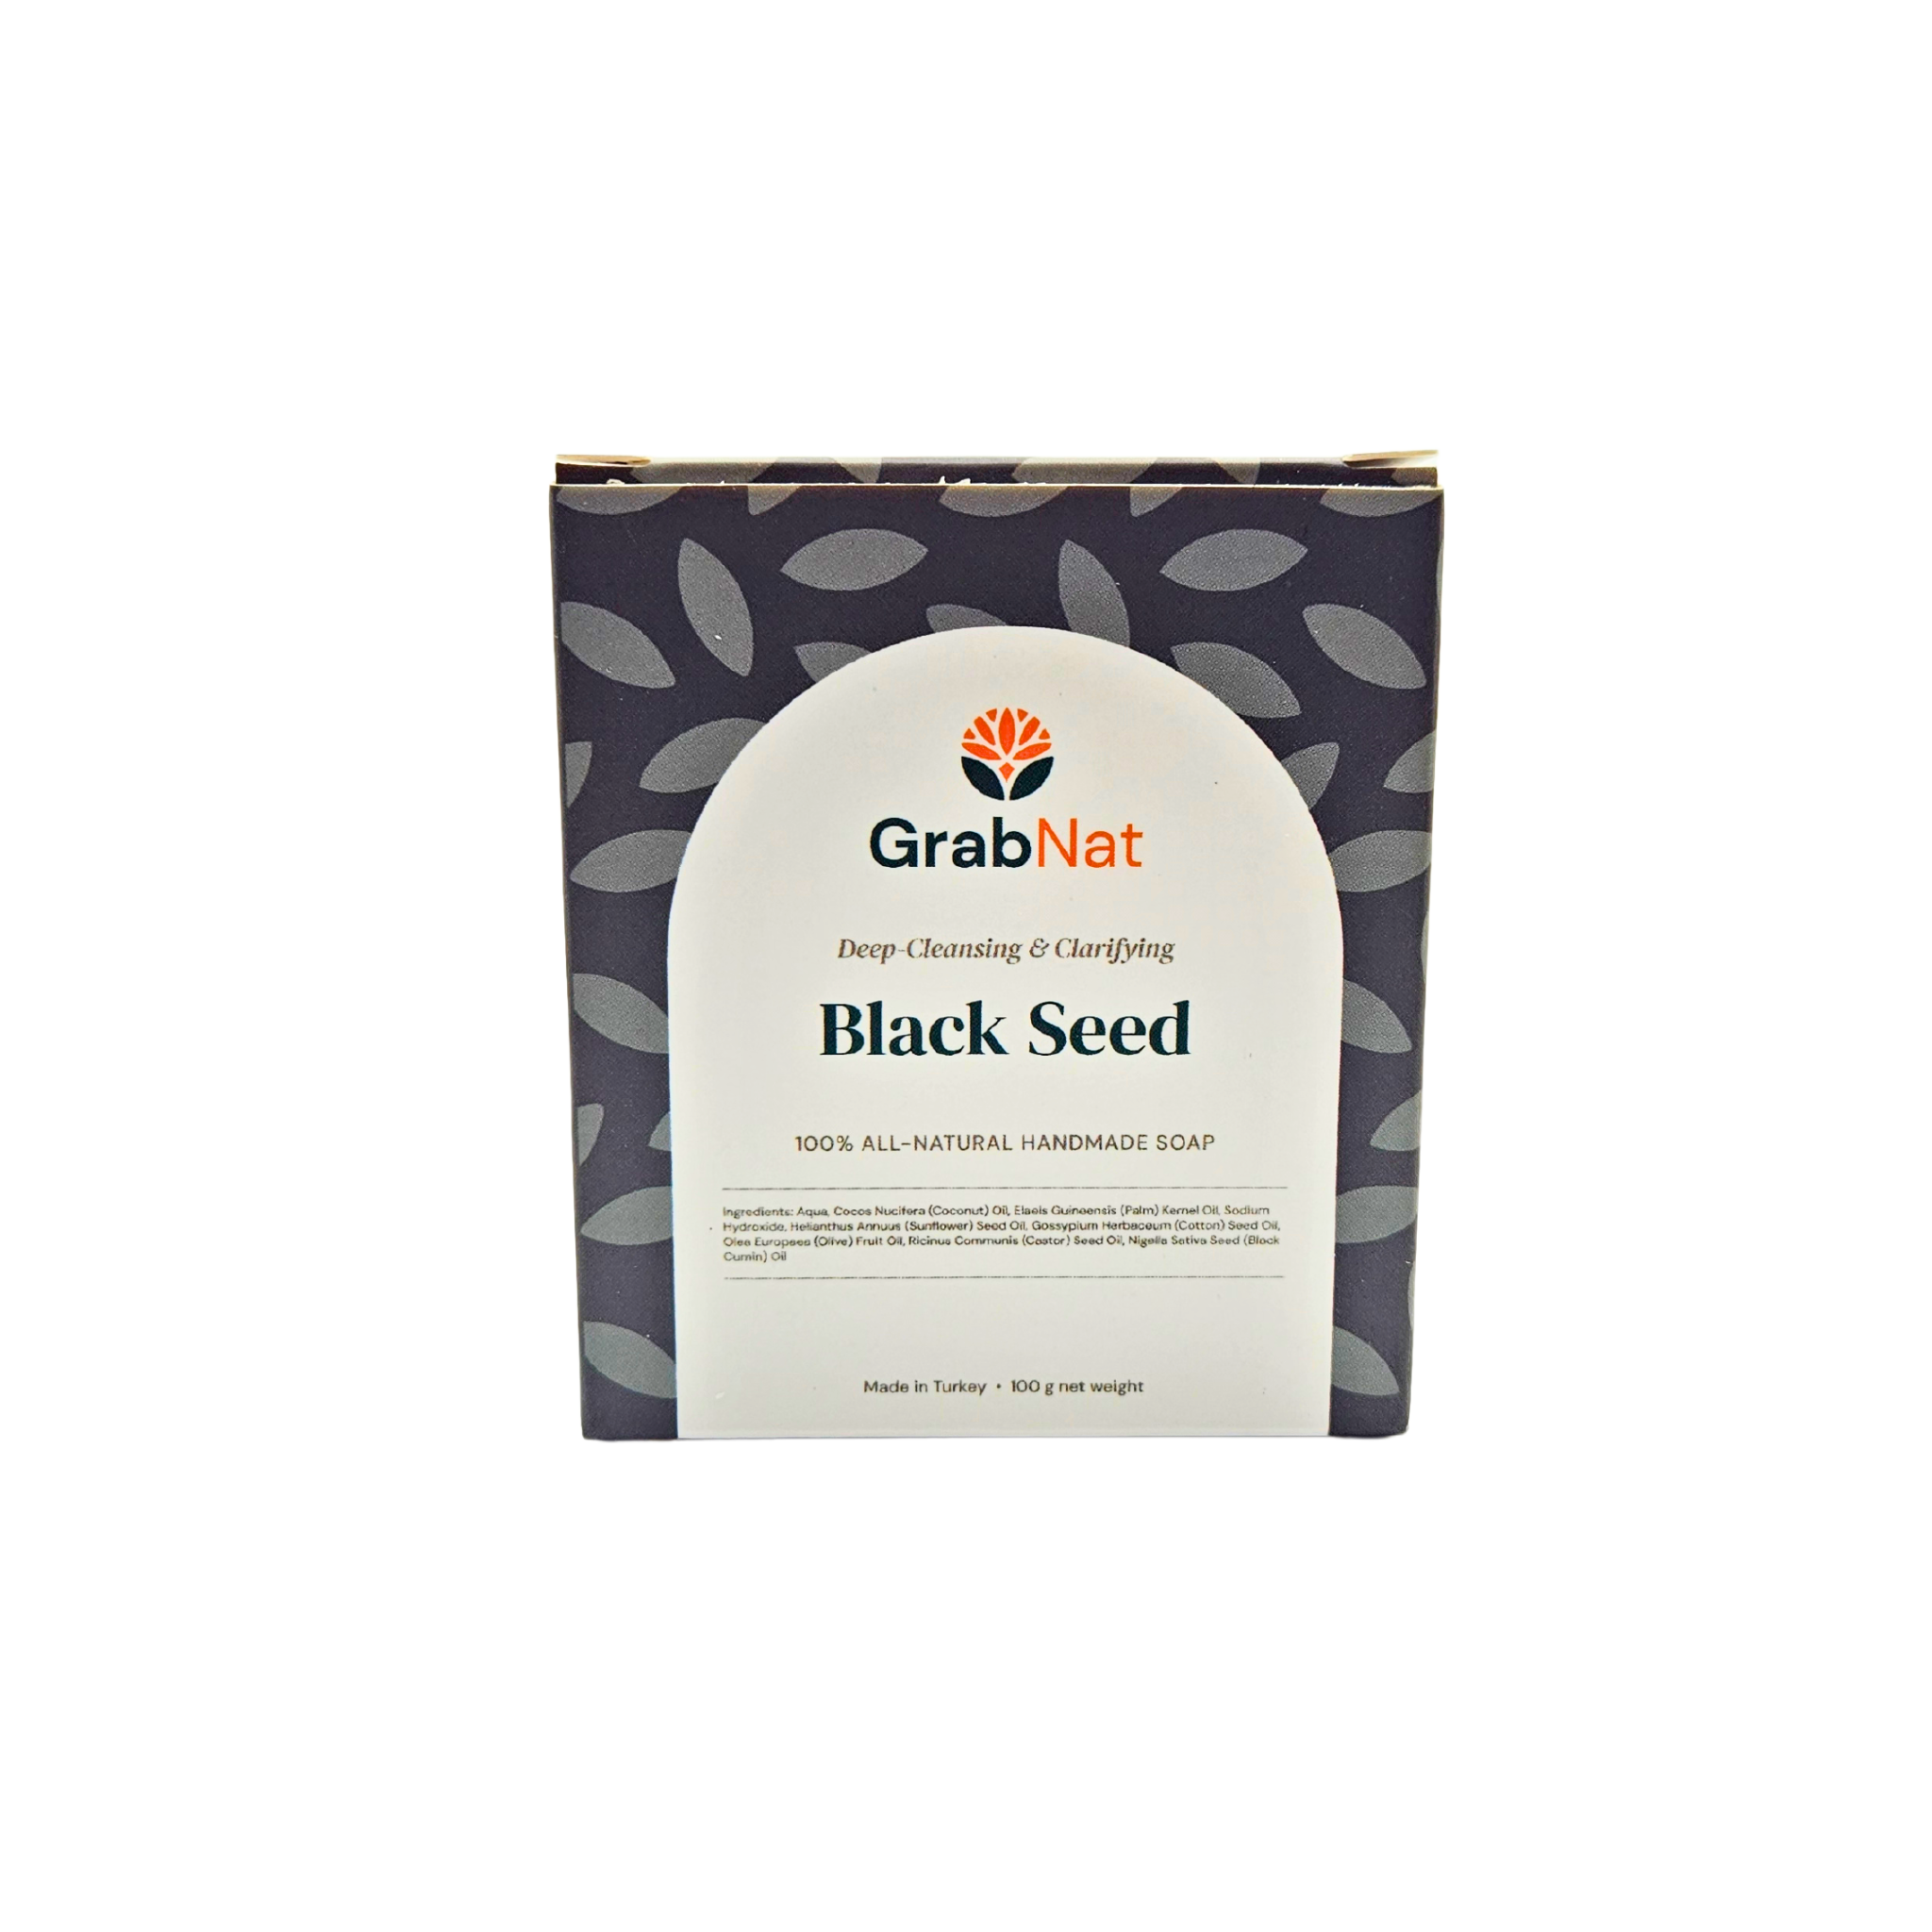 Purifying Powers Sensitive Dry Skin Variety Pack (5 pack): Activated Charcoal, Black Seed, Nettle, Rosemary, Tea Tree